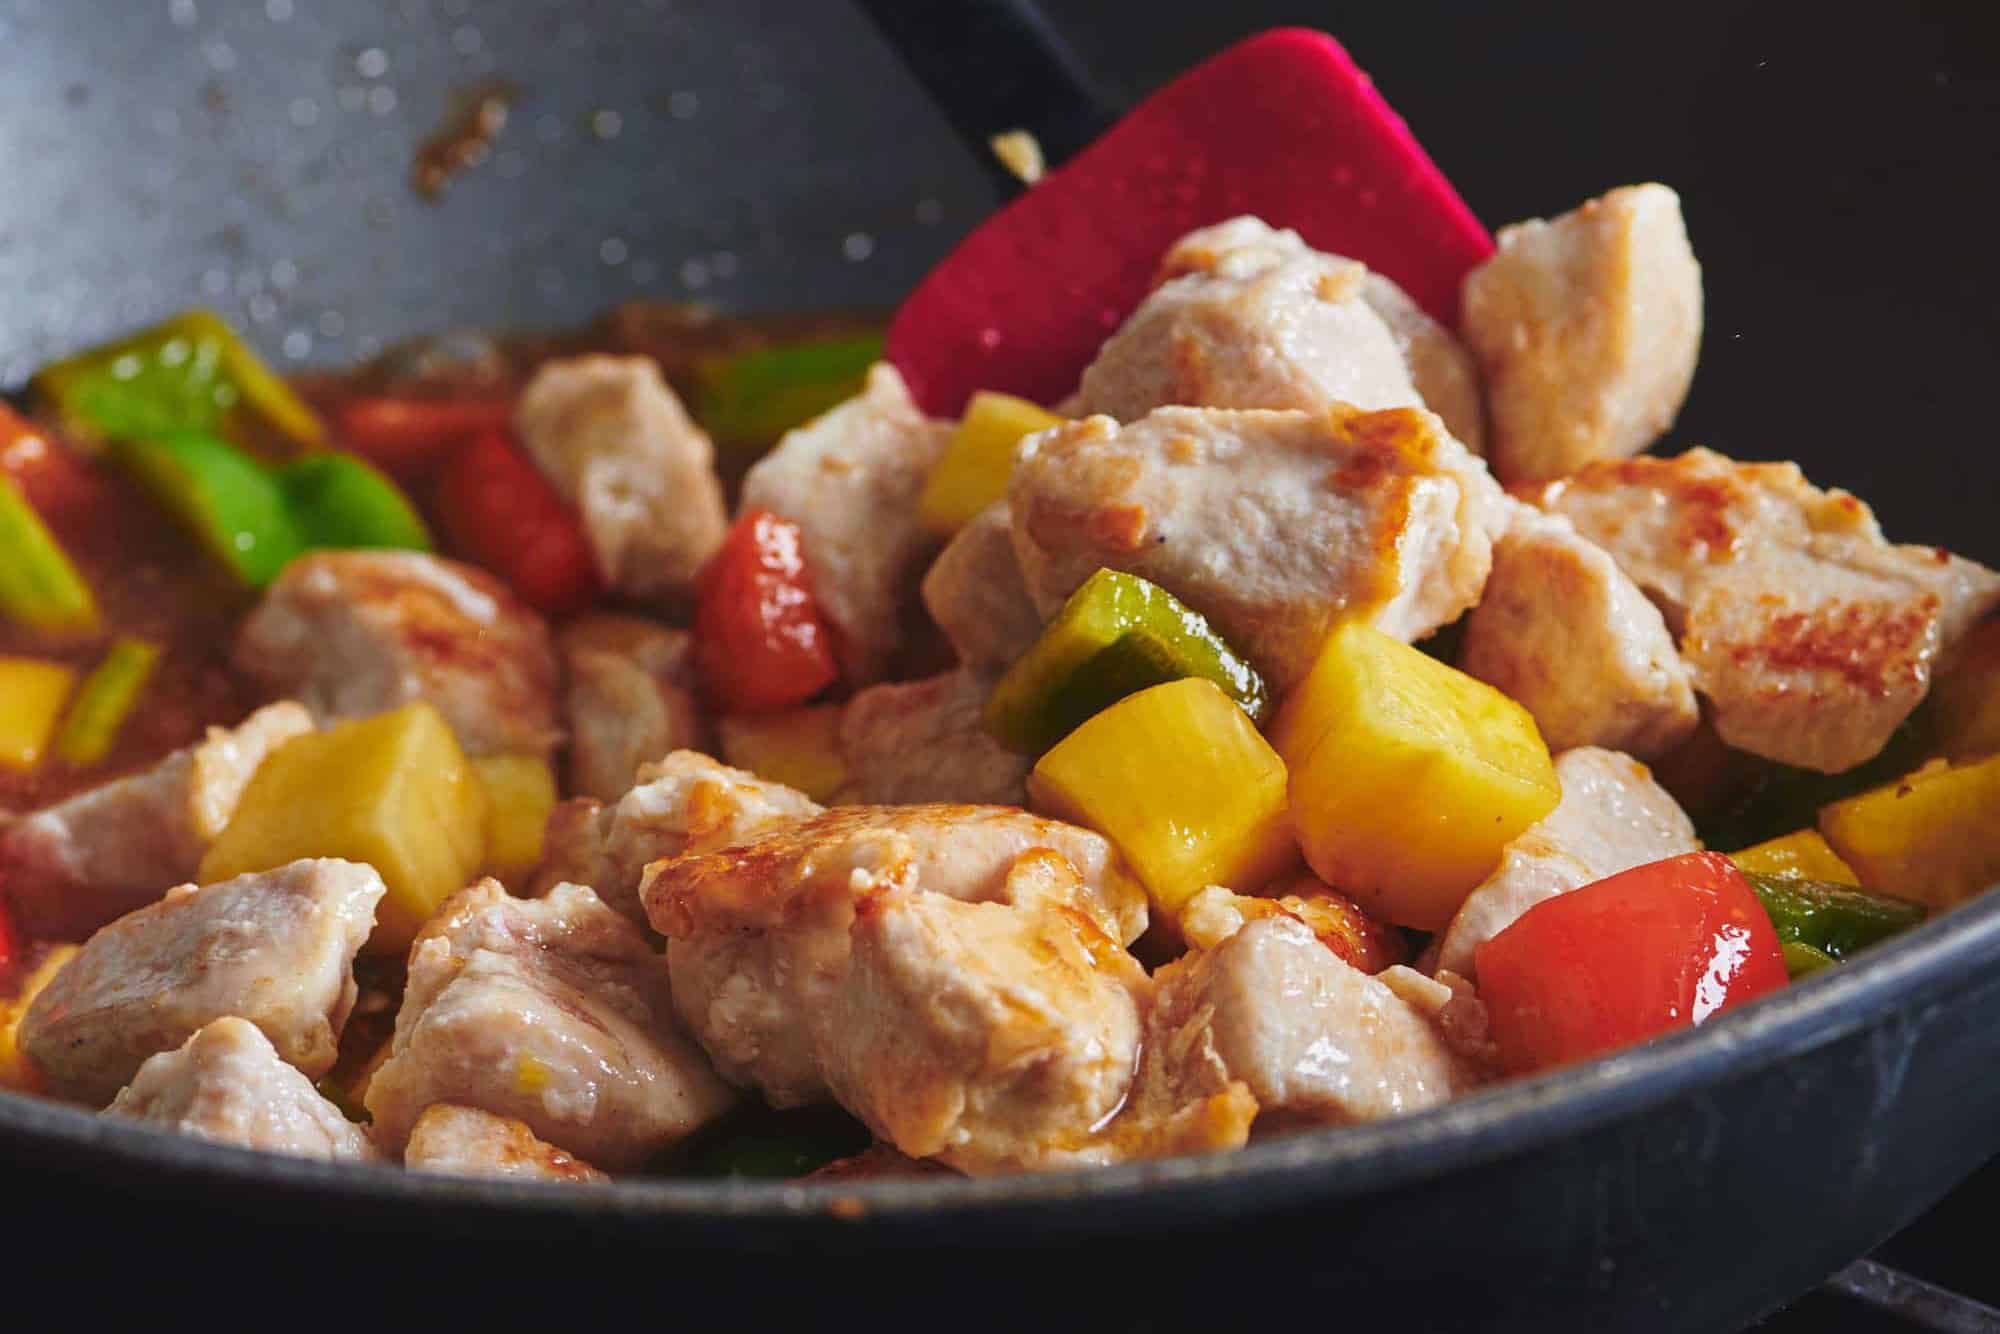 Spatula stirring Sweet and Sour Chicken with vegetables and pineapple chunks.